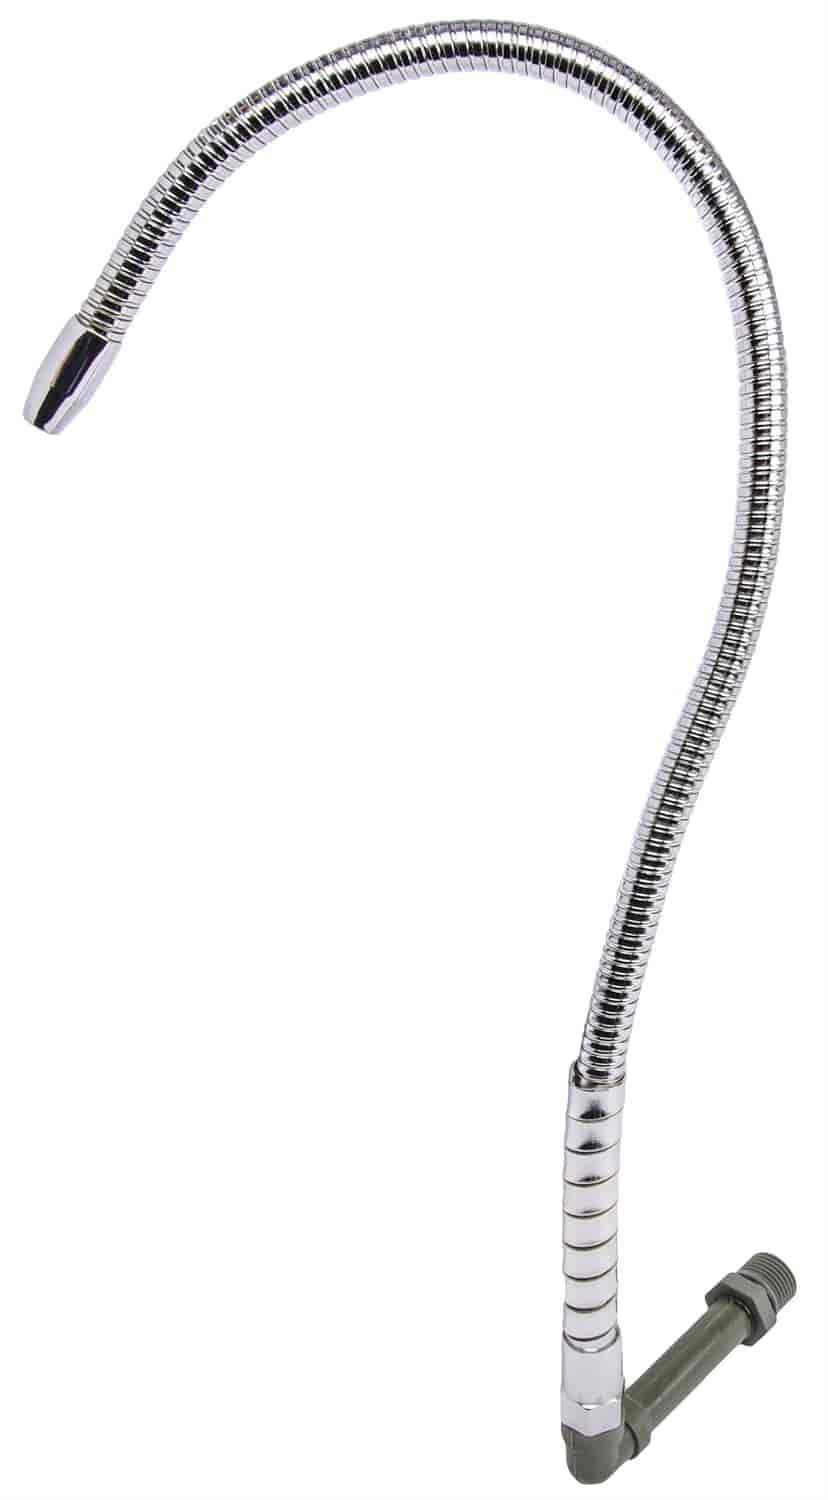 Replacement Pump Outlet Hose for JEGS 40-Gallon Parts Washer 555-81553